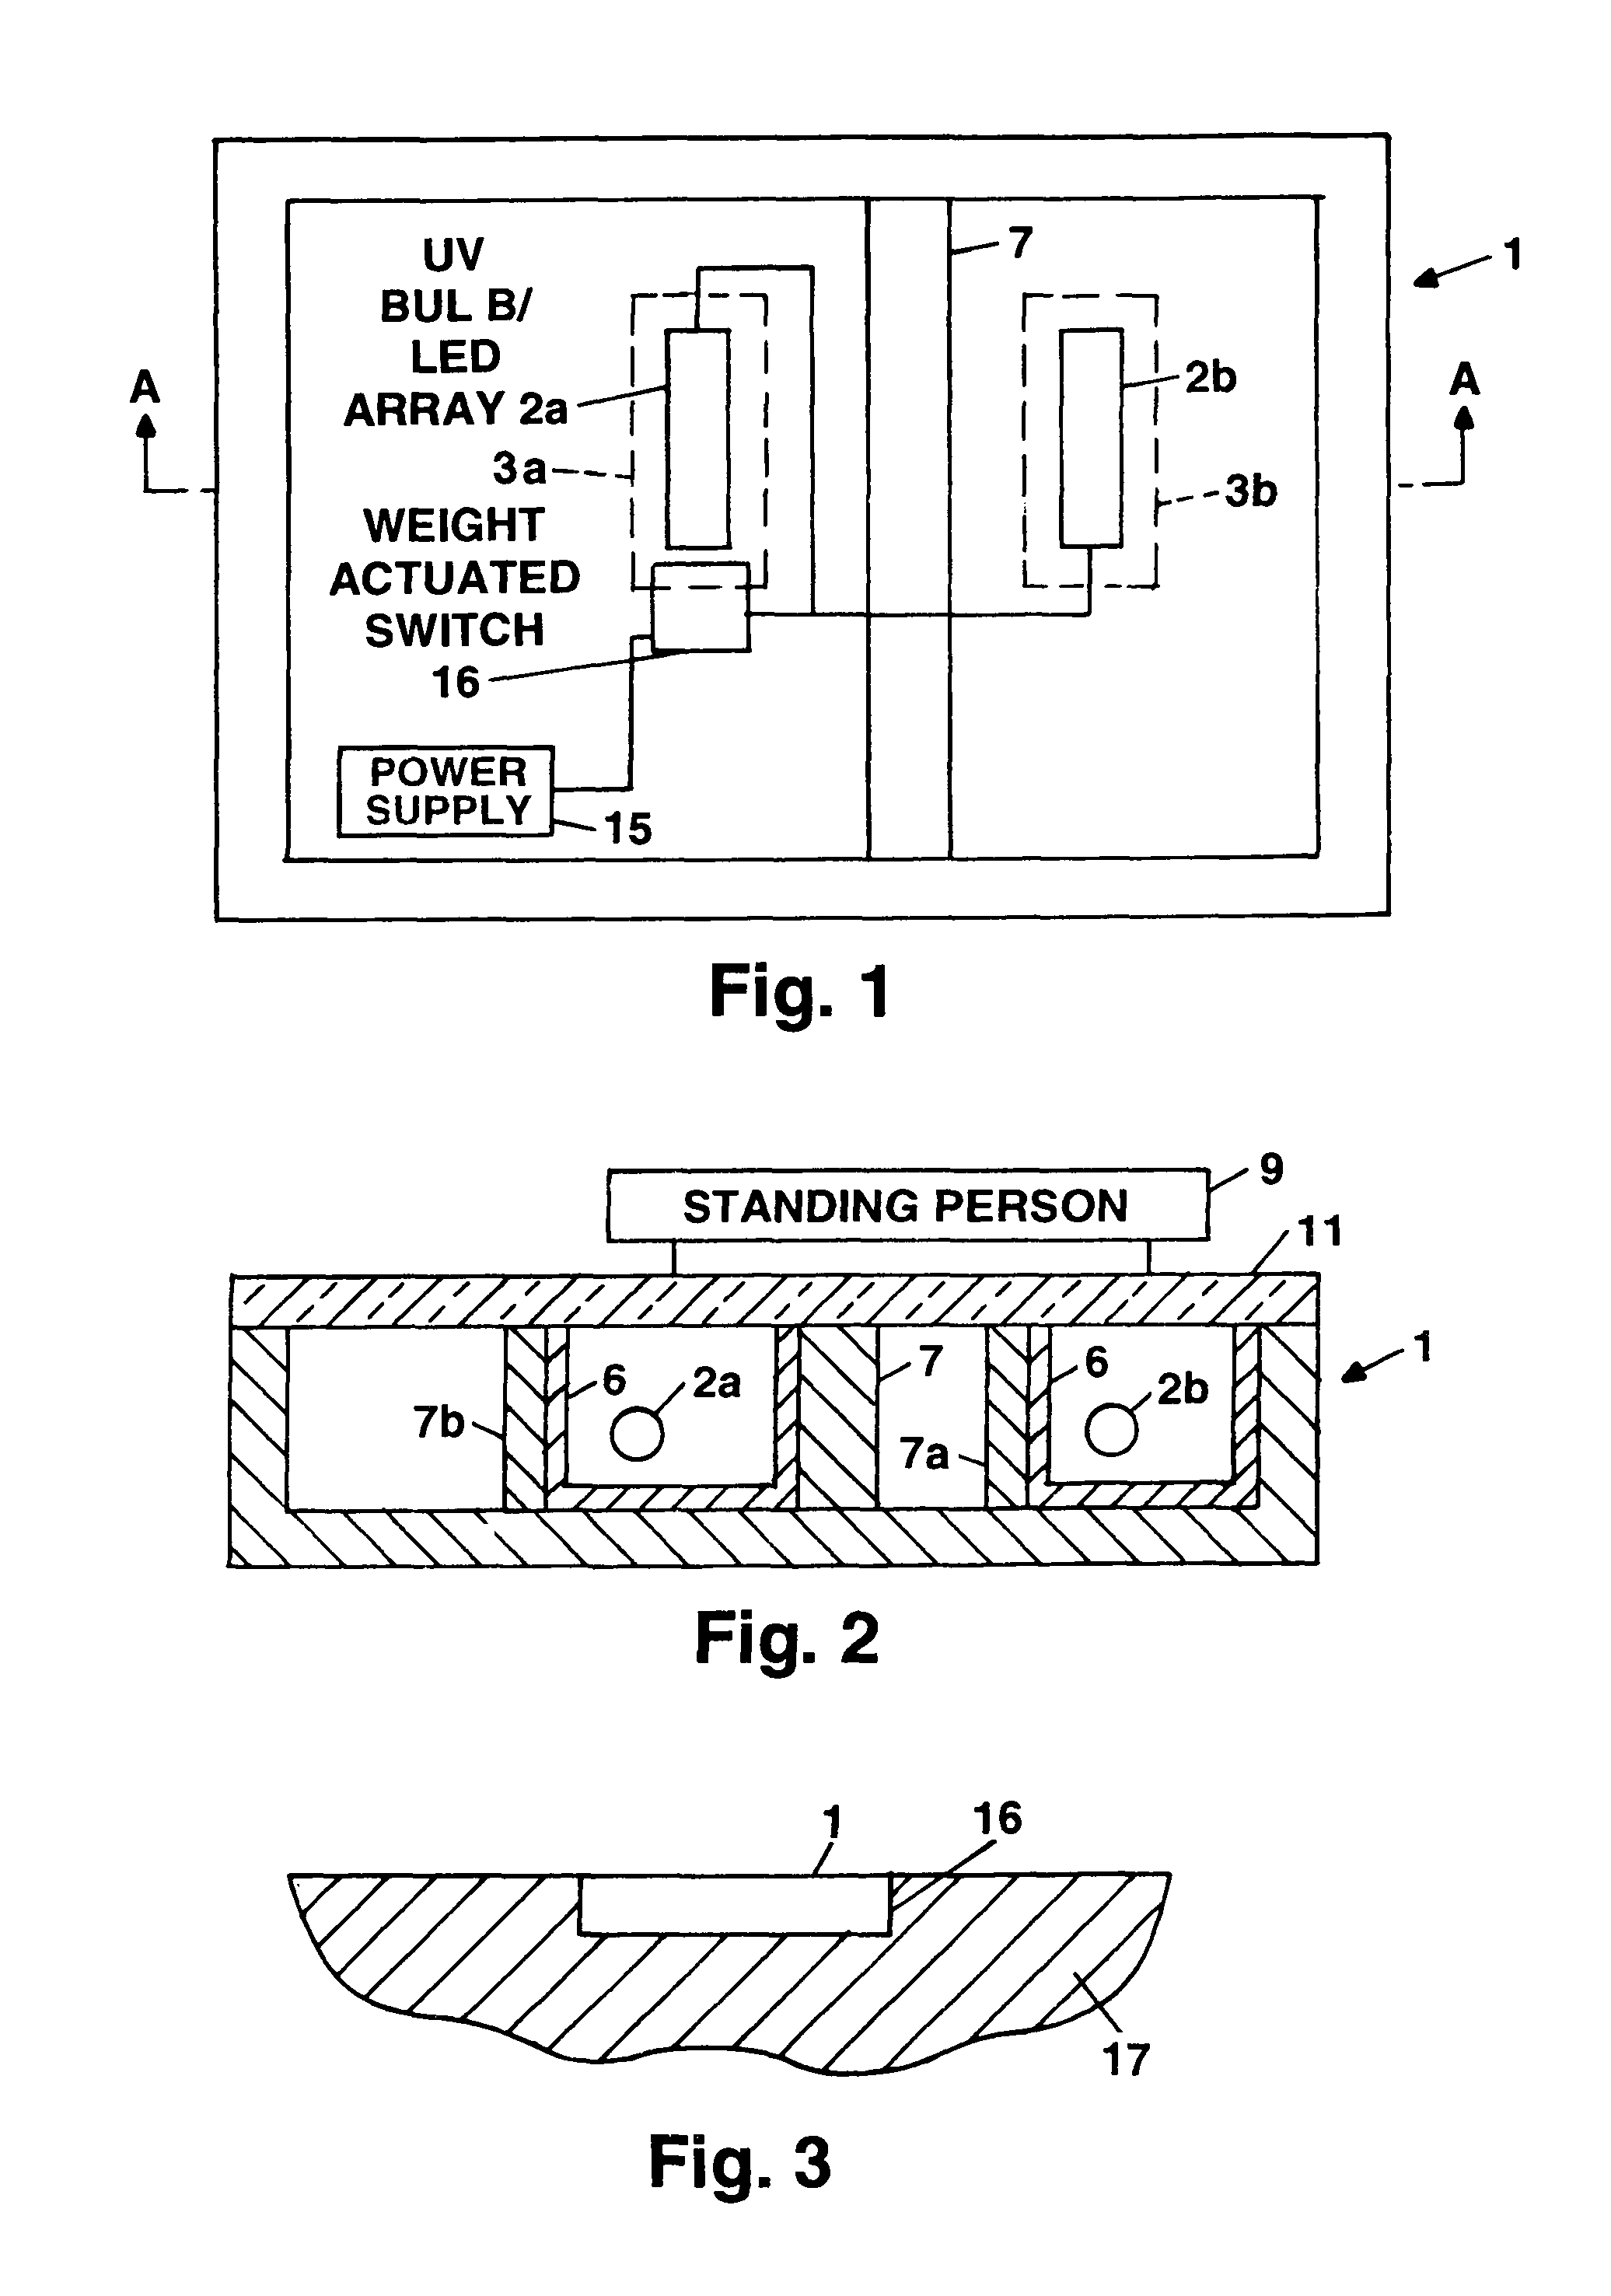 Apparatus for sanitizing feet of persons entering a home